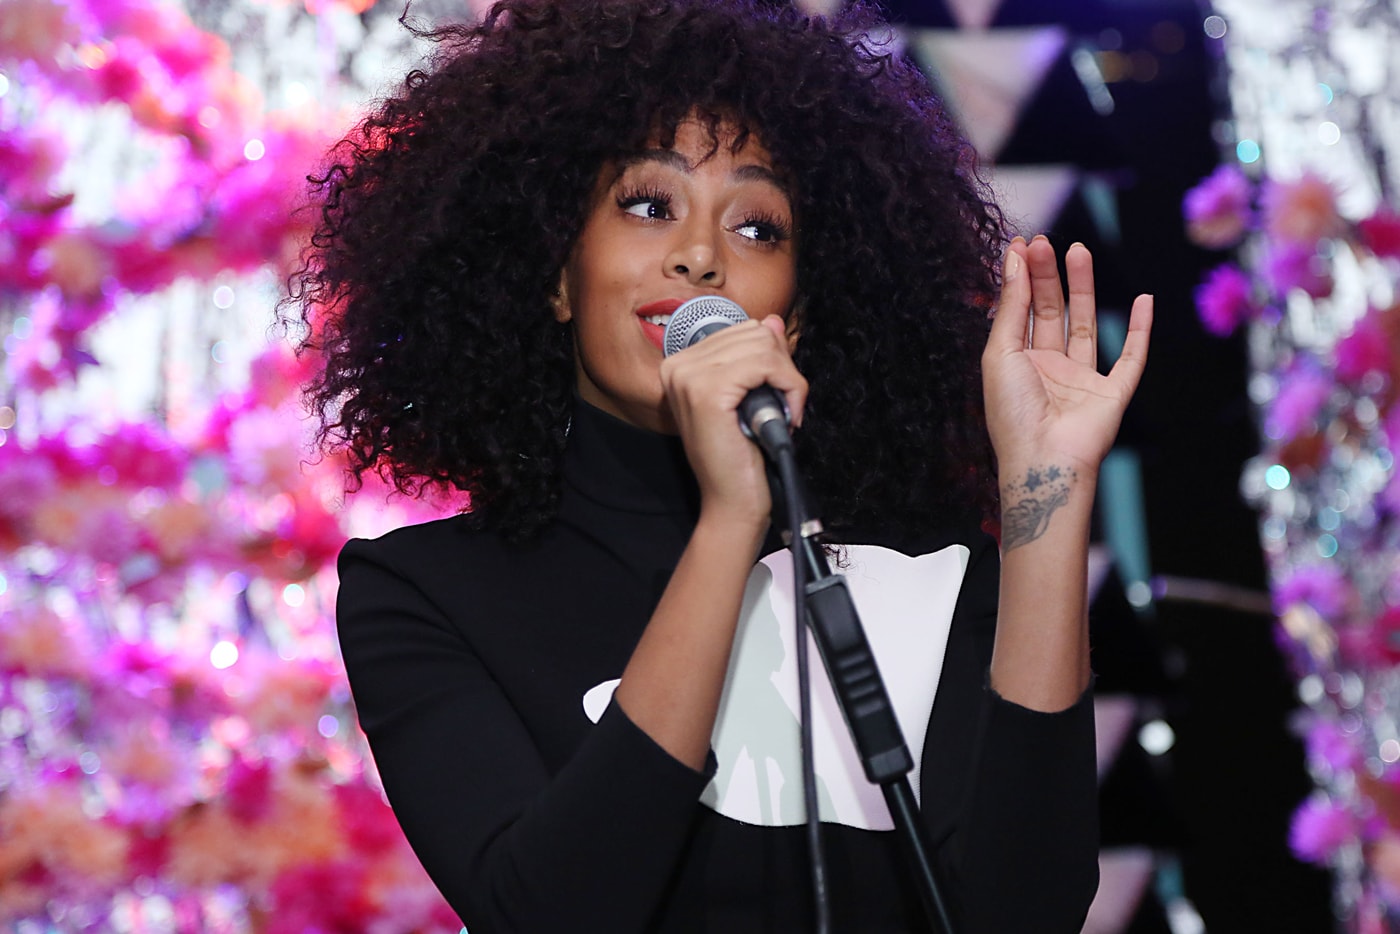 solange-new-album-a-seat-at-the-table-release-date